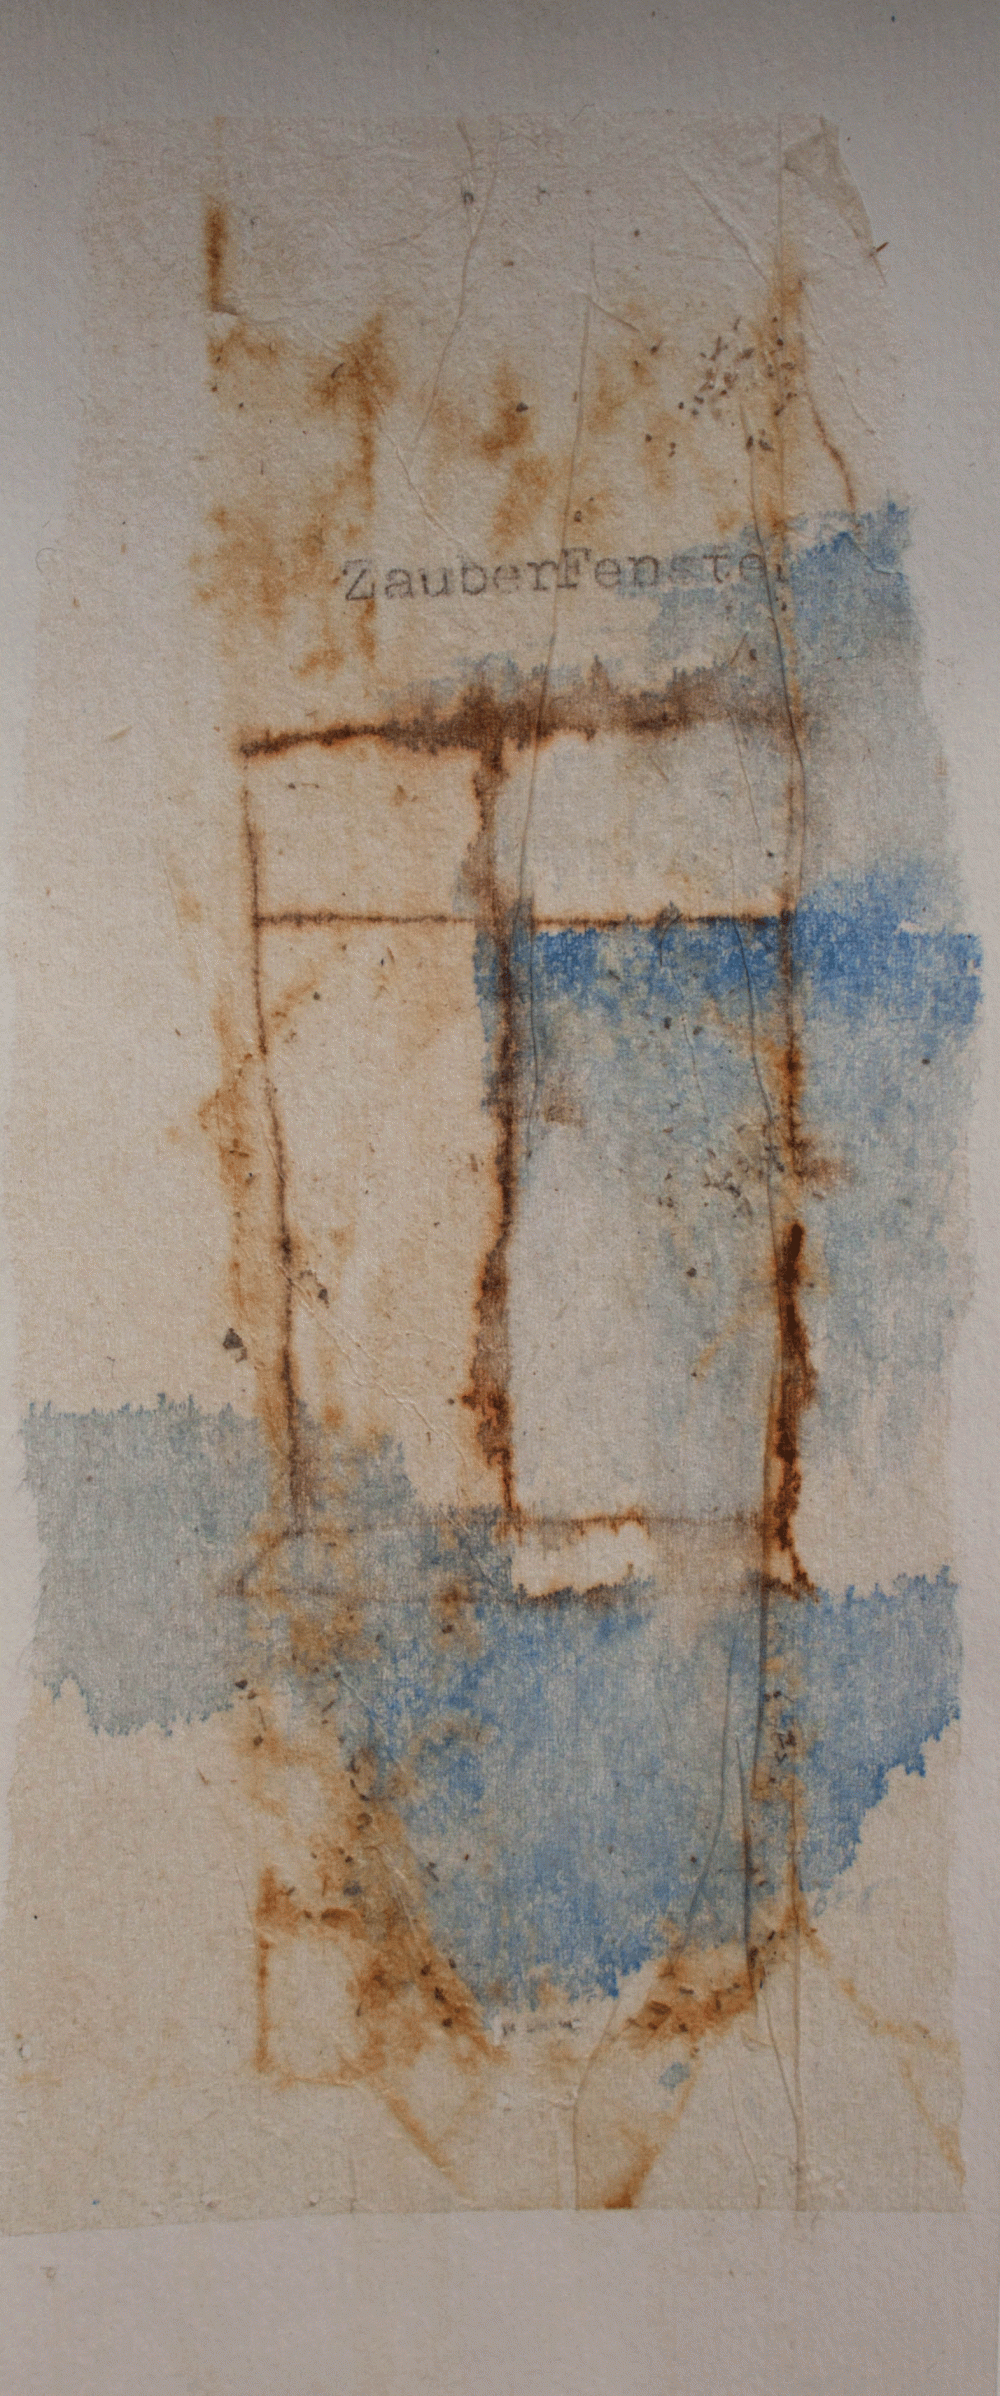 ZauberFenster | 2012 | watercolor and typewriter on used teabag